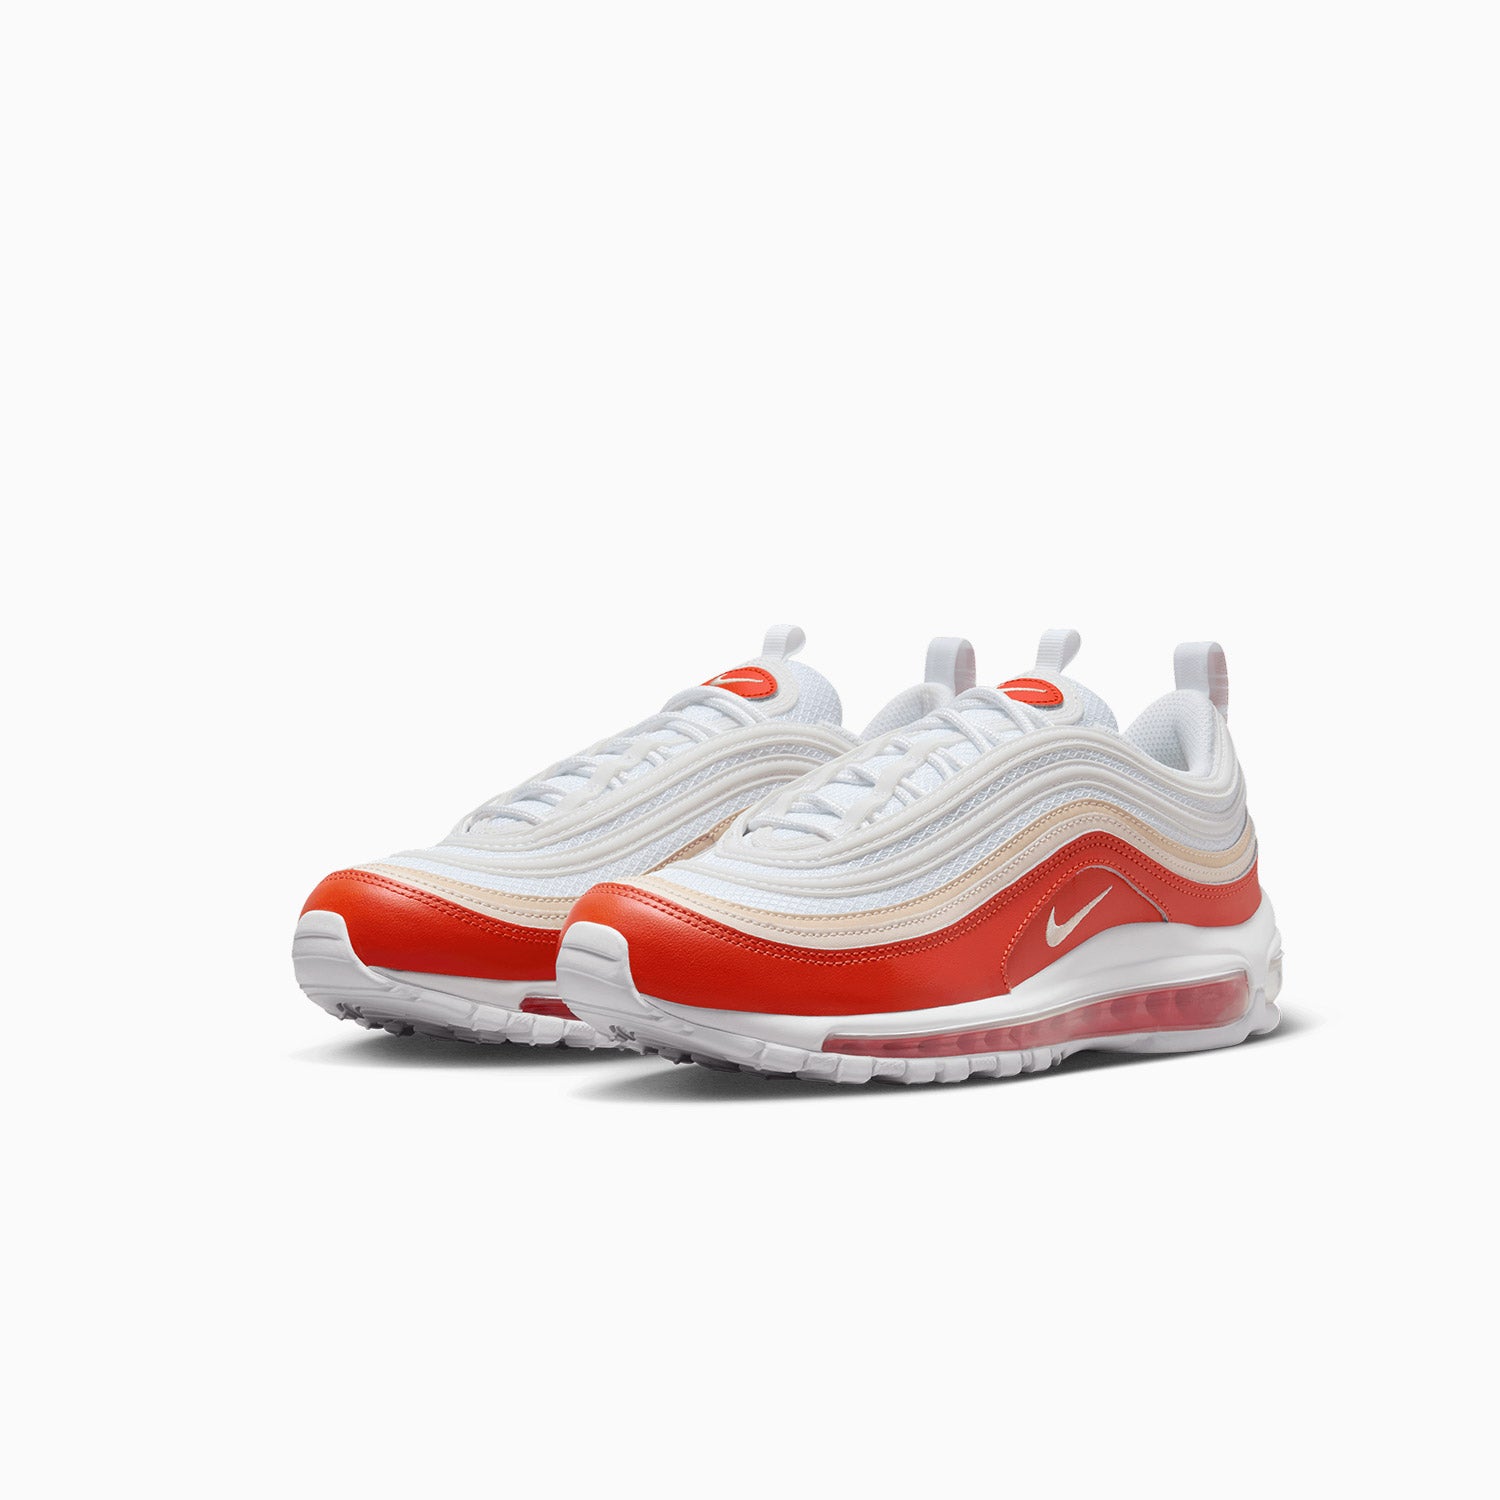 nike-mens-air-max-97-picante-red-shoes-fn6869-633